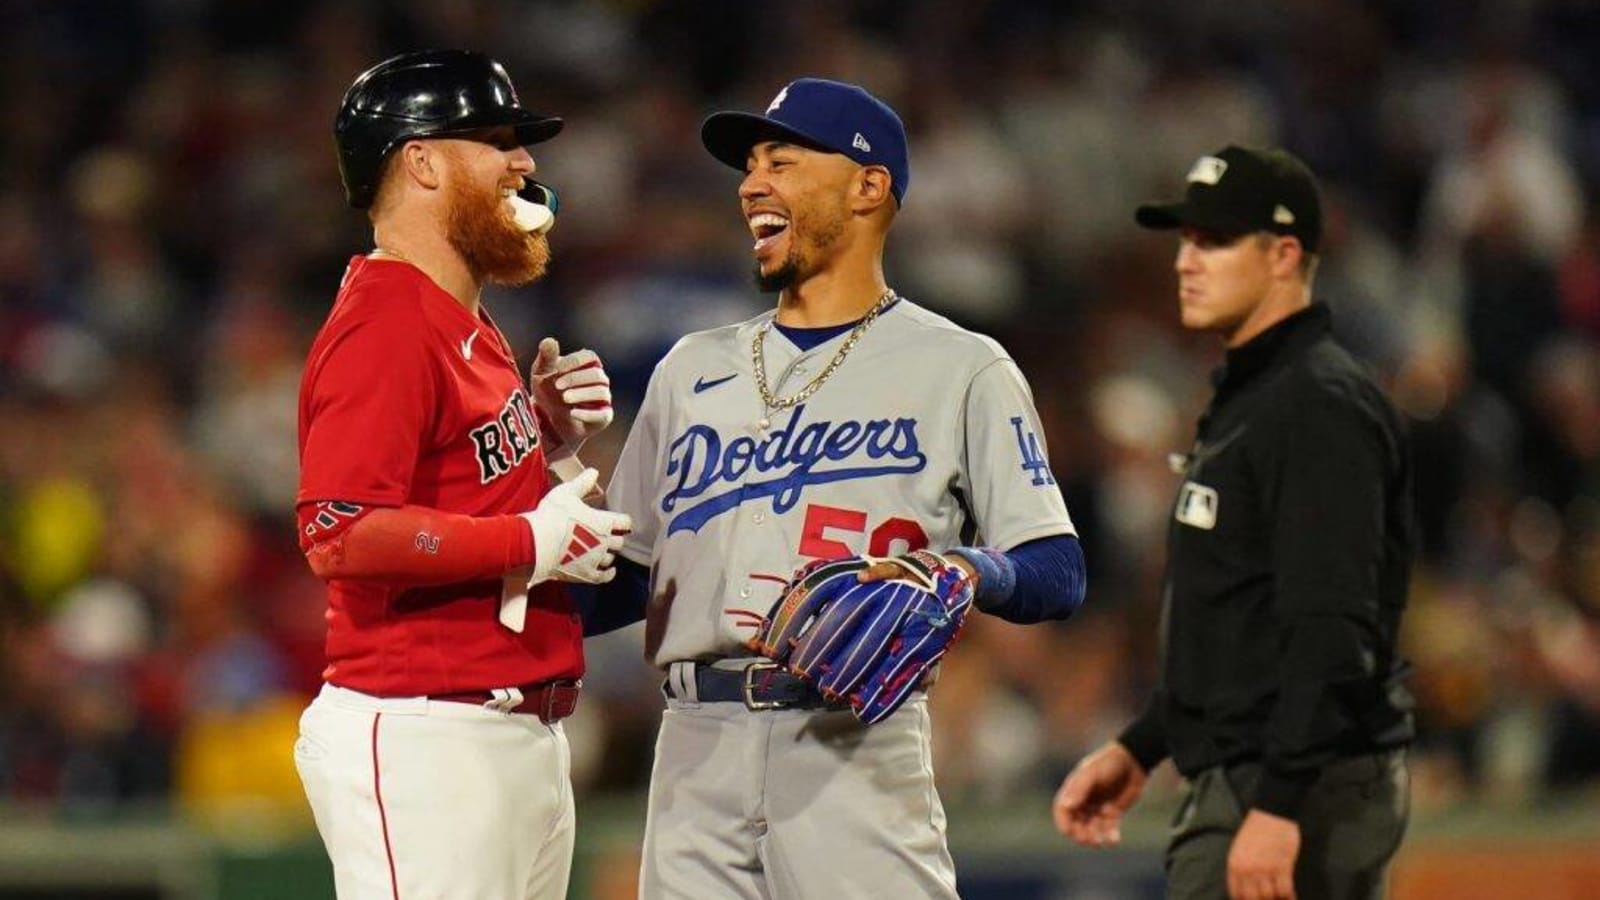 Clash of the Titans: Red Sox vs Dodgers in an Exciting Showdown at Fenway Park